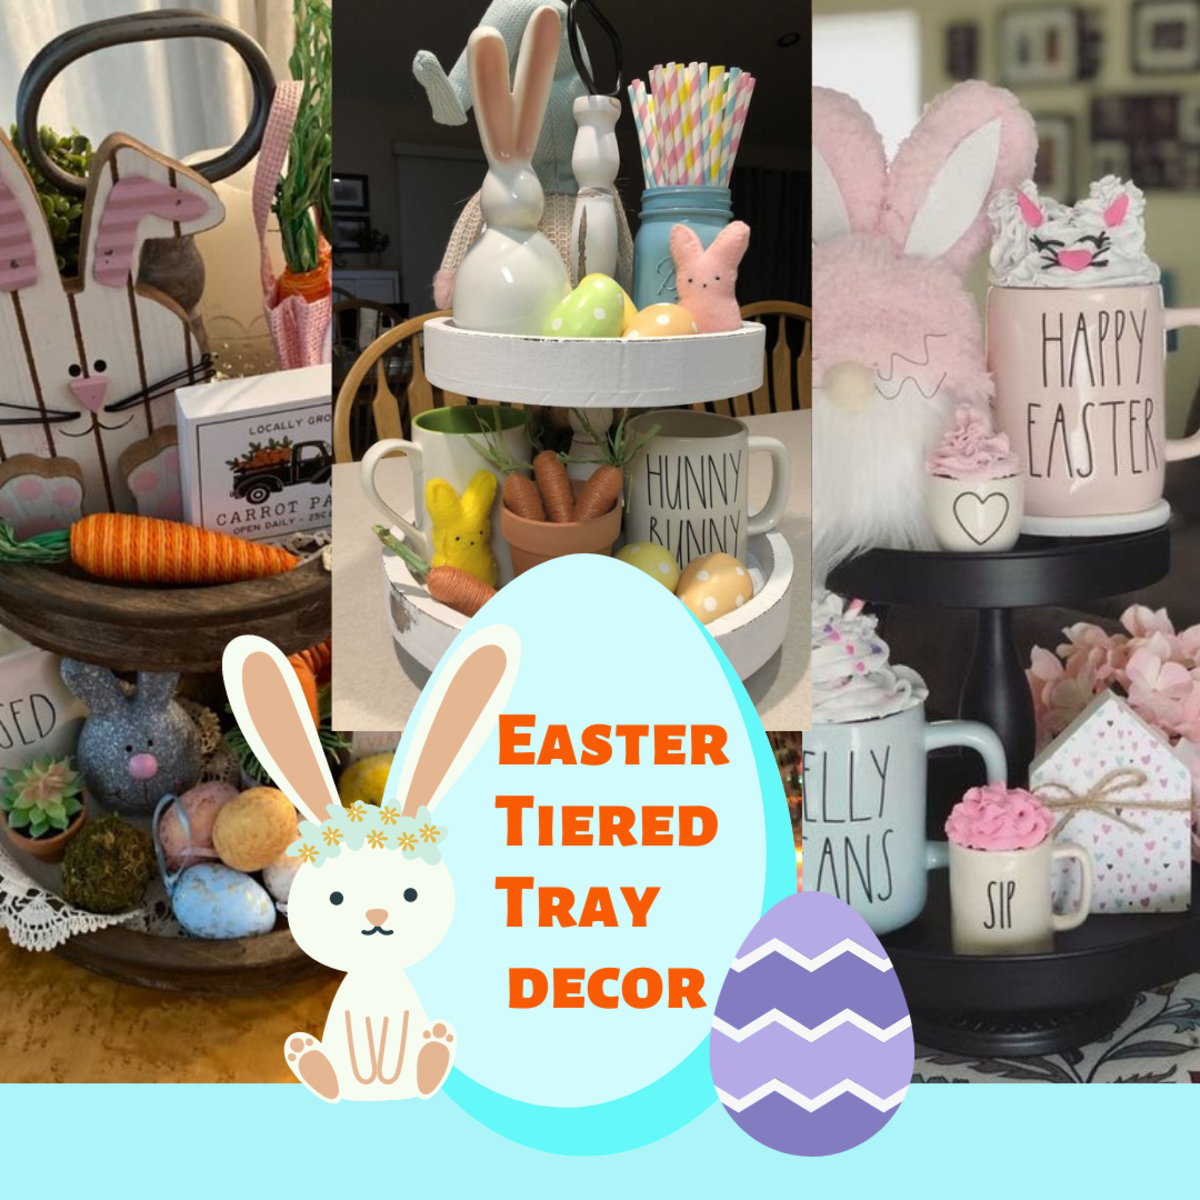 45+ Super Adorable Easter Tiered Tray Ideas that will have you Hopping with Egg-citement